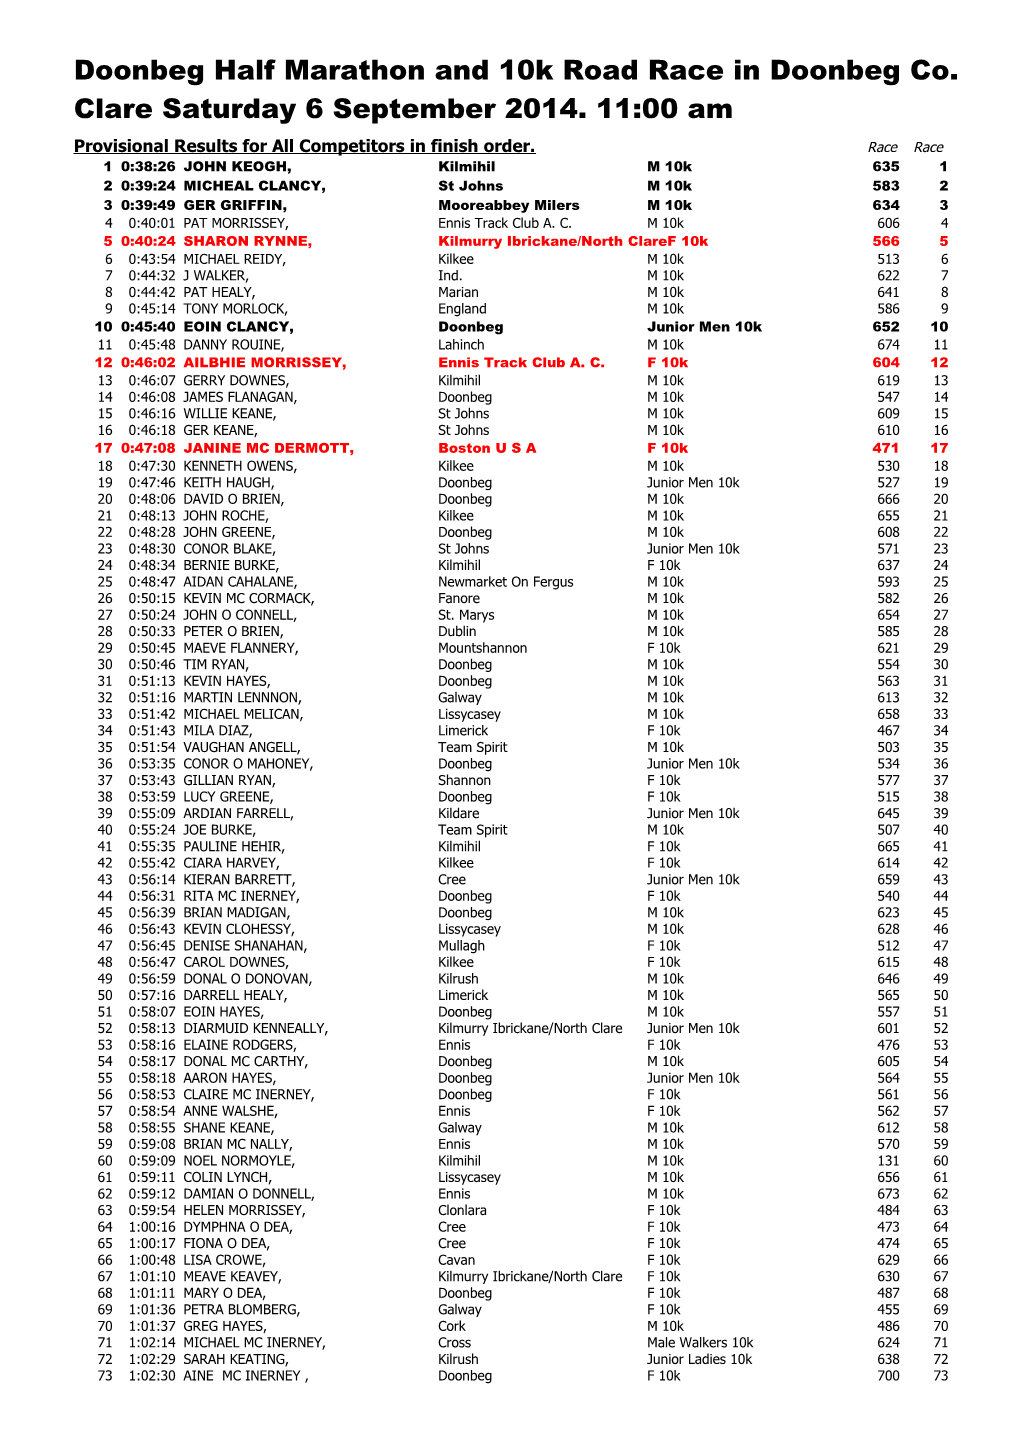 Provisional Results for All Competitors in Finish Order. Racerace